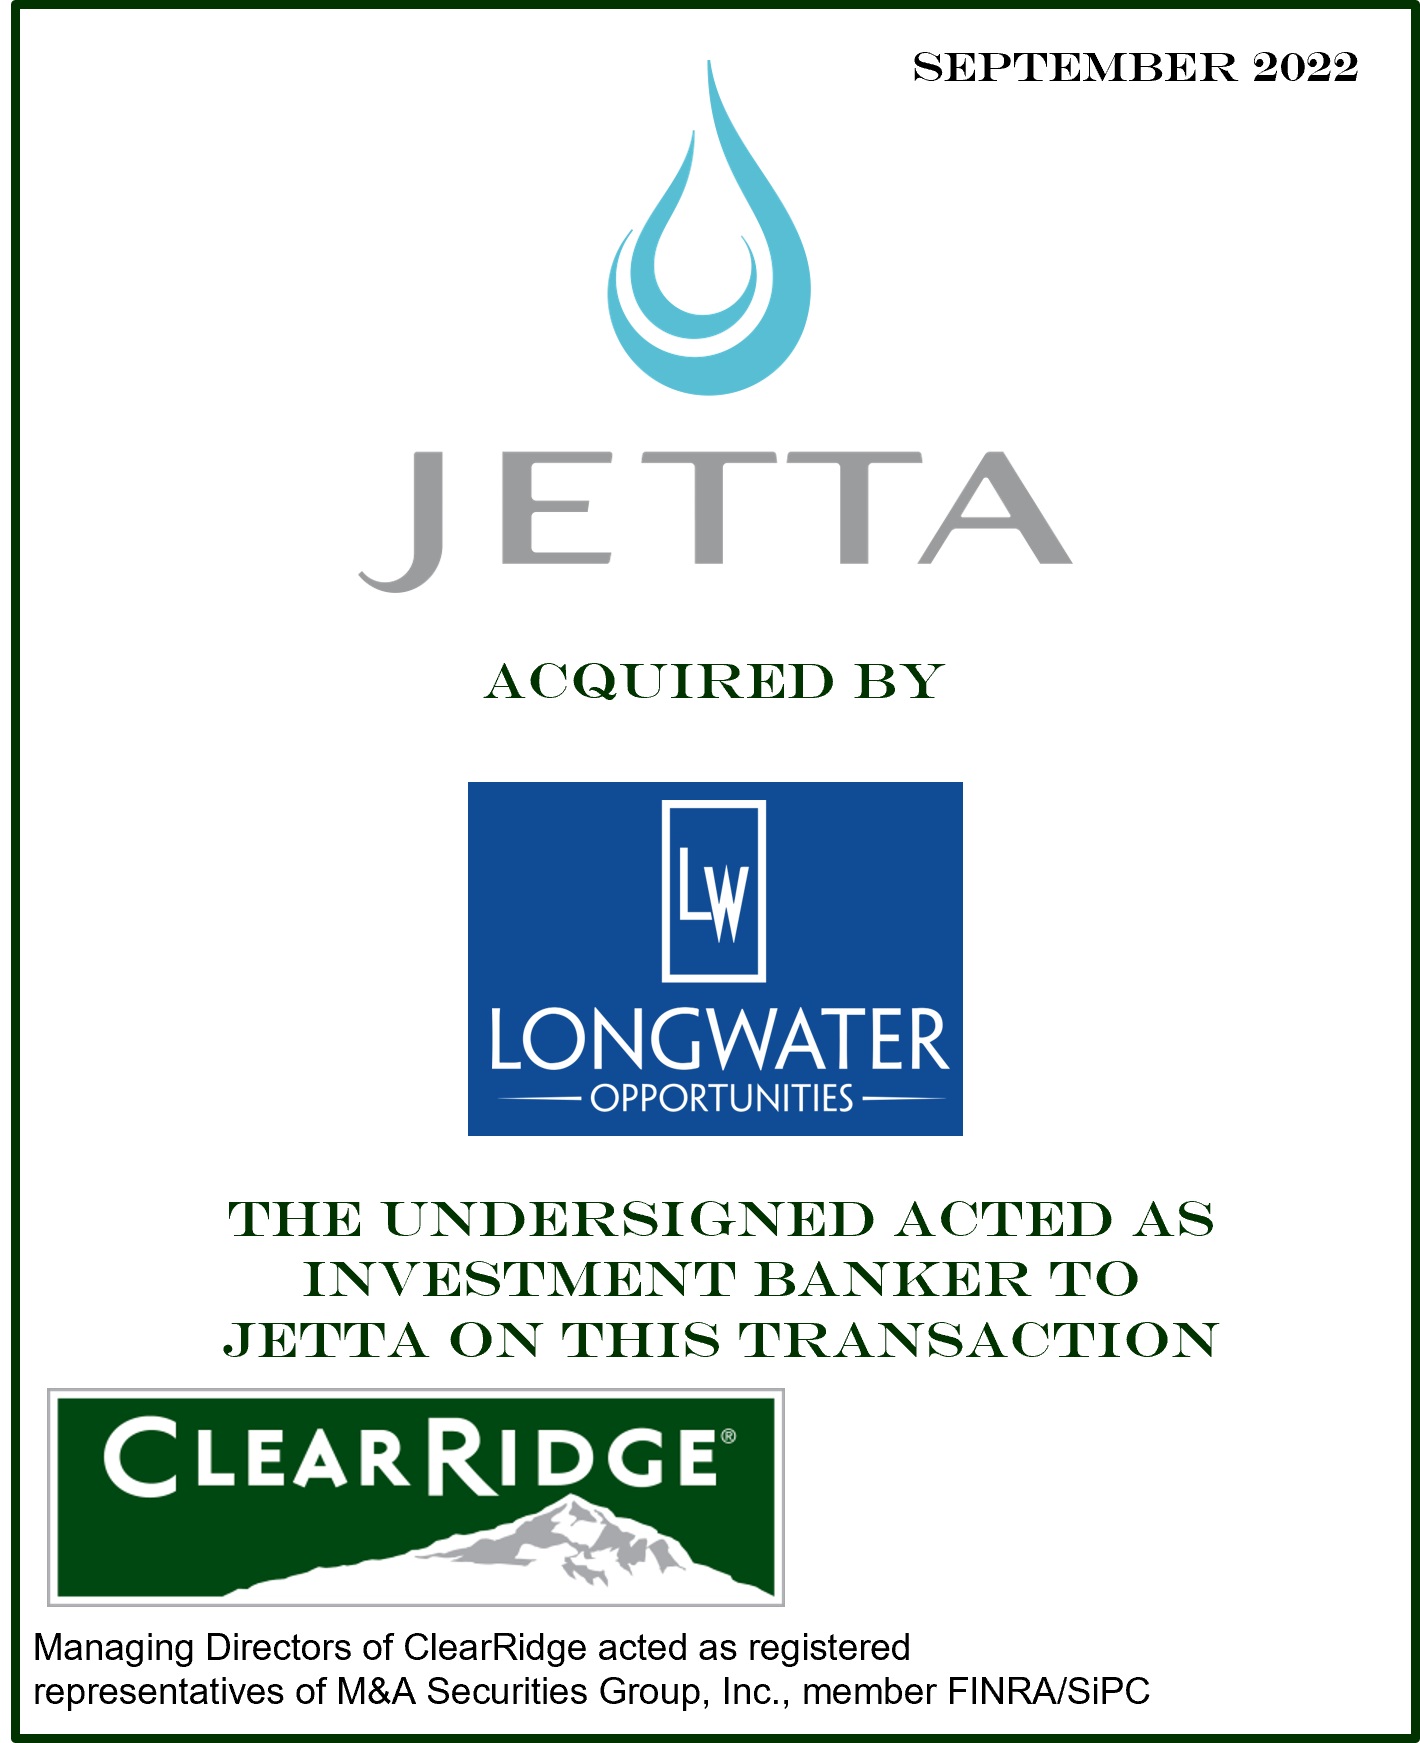 Jetta acquired by Longwater